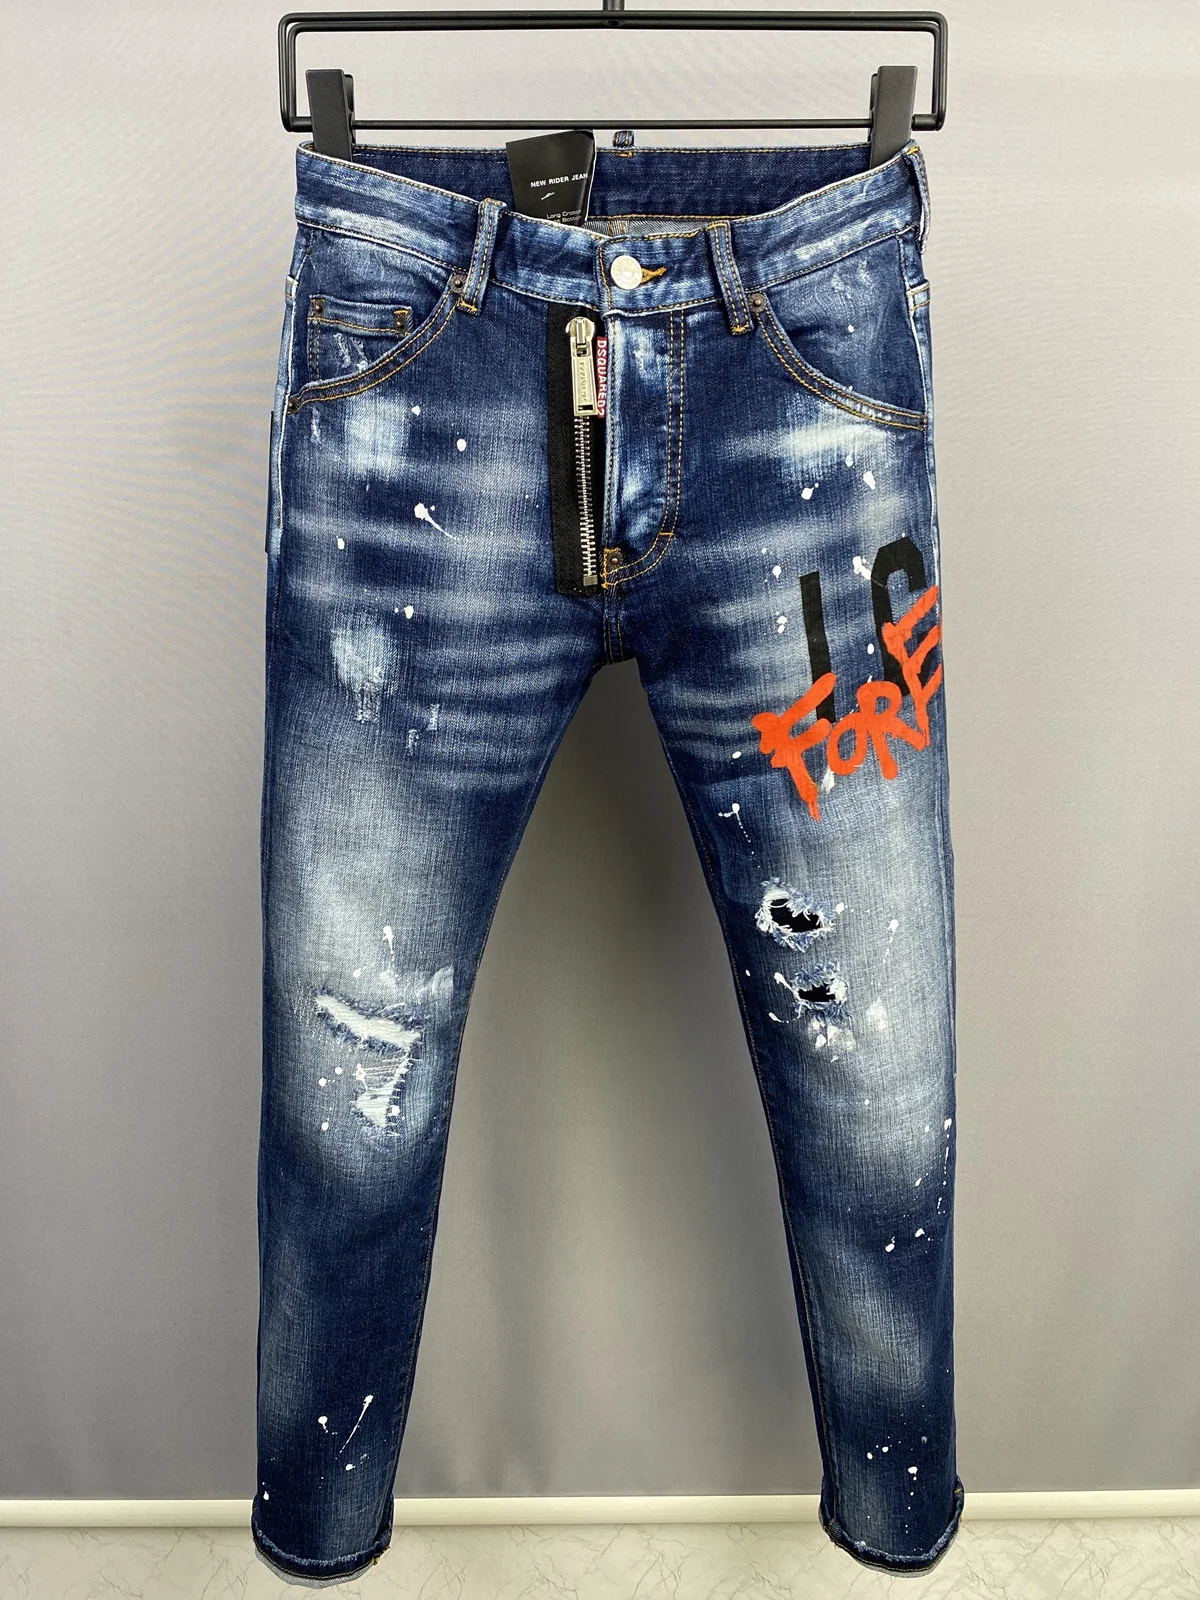 

2023 New Fashion Brand DSQ D2 Men's Washed, Worn, Ripped, Paint Spot Motorcycle Jeans